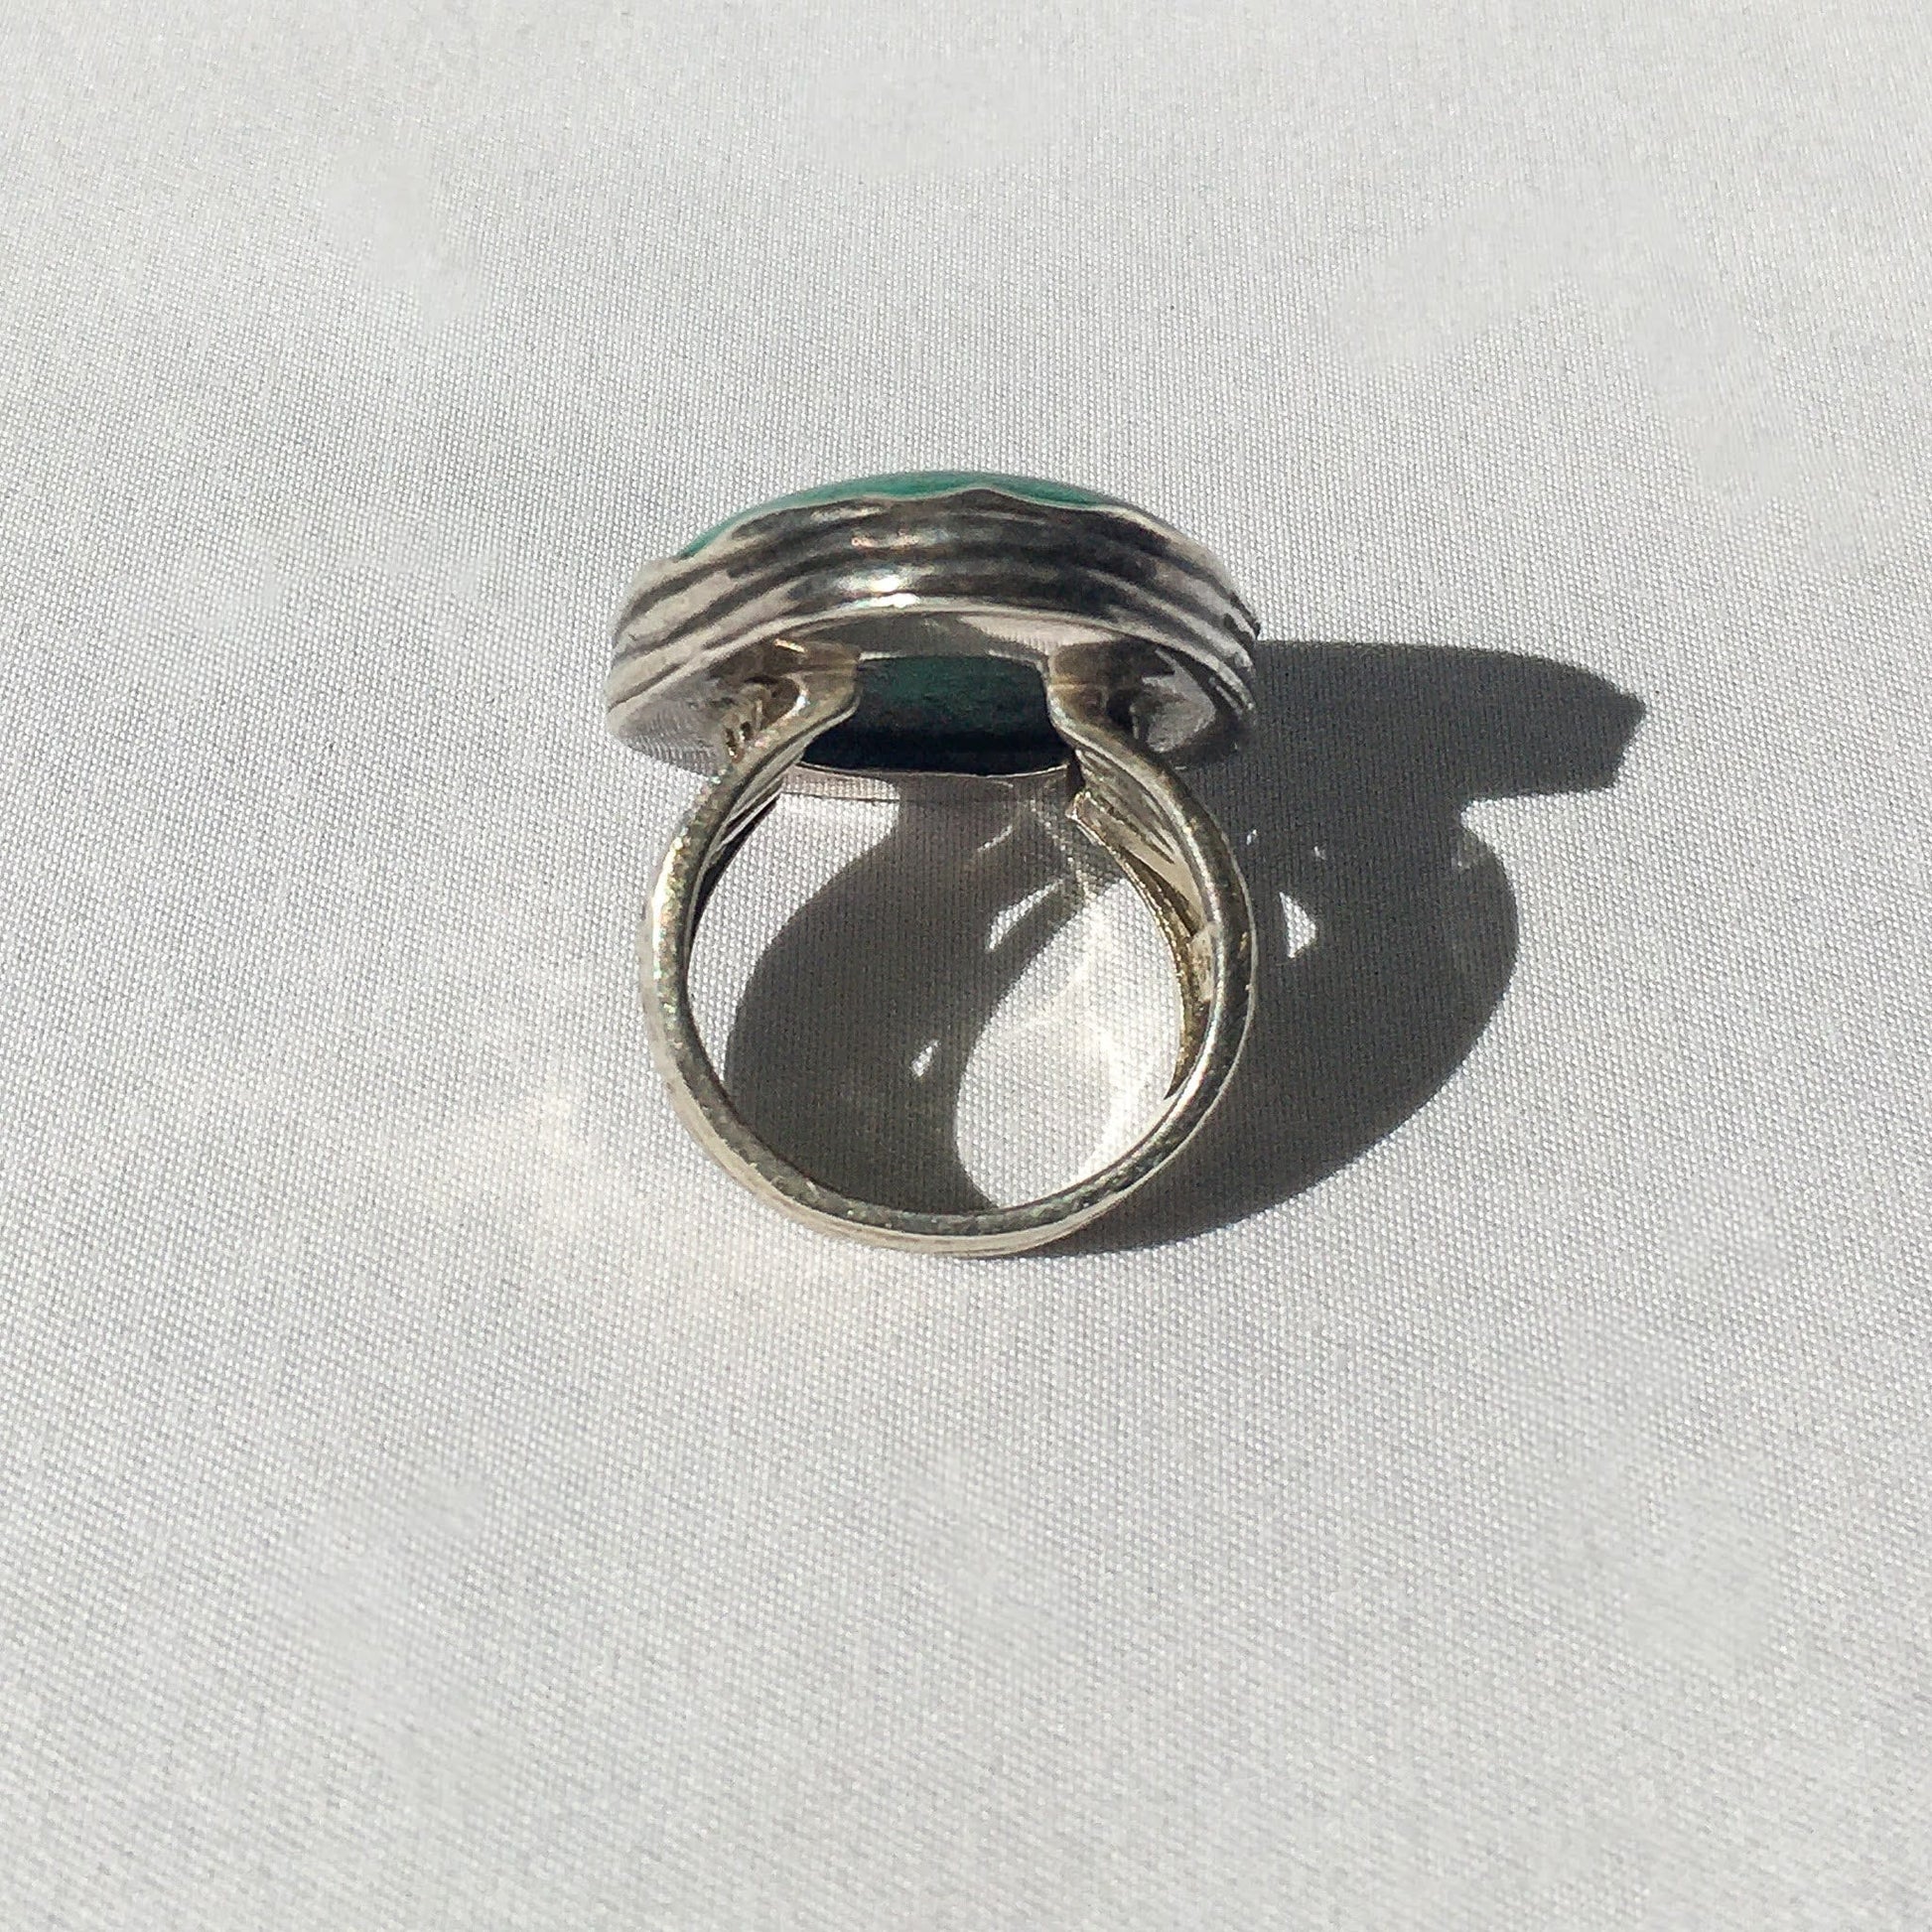 Vintage 925 India SILPADA Turquoise Stone Ring, Statement Ring, Vintage Silver Ring, APPROX. Size 7.75